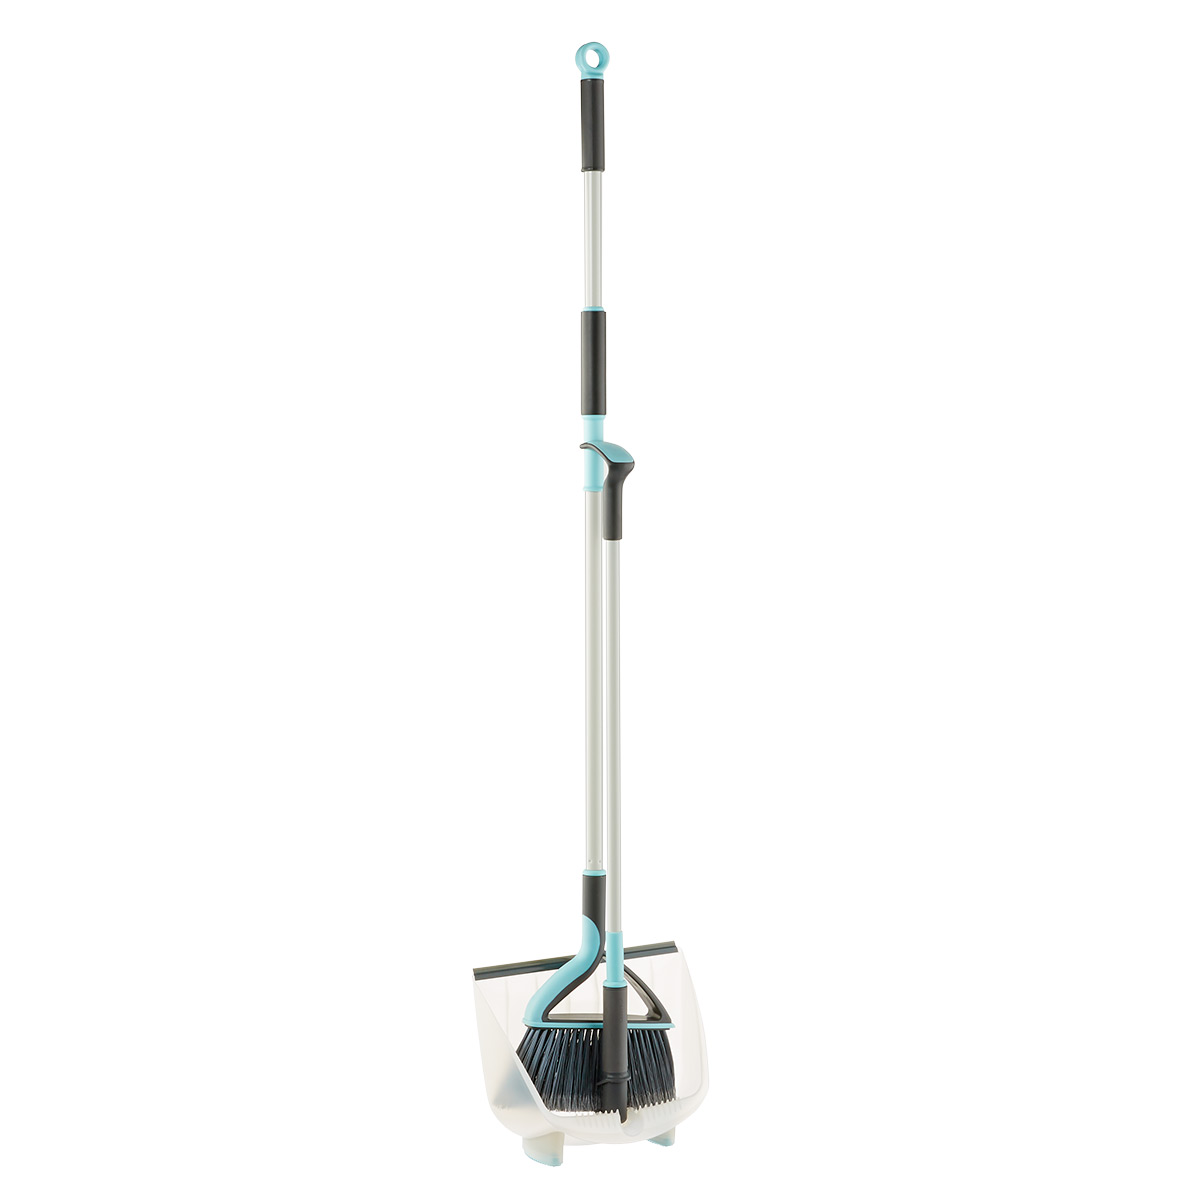 Casabella Upright Broom and Dustpan Set for Cleaning and Sweeping Home  Floors